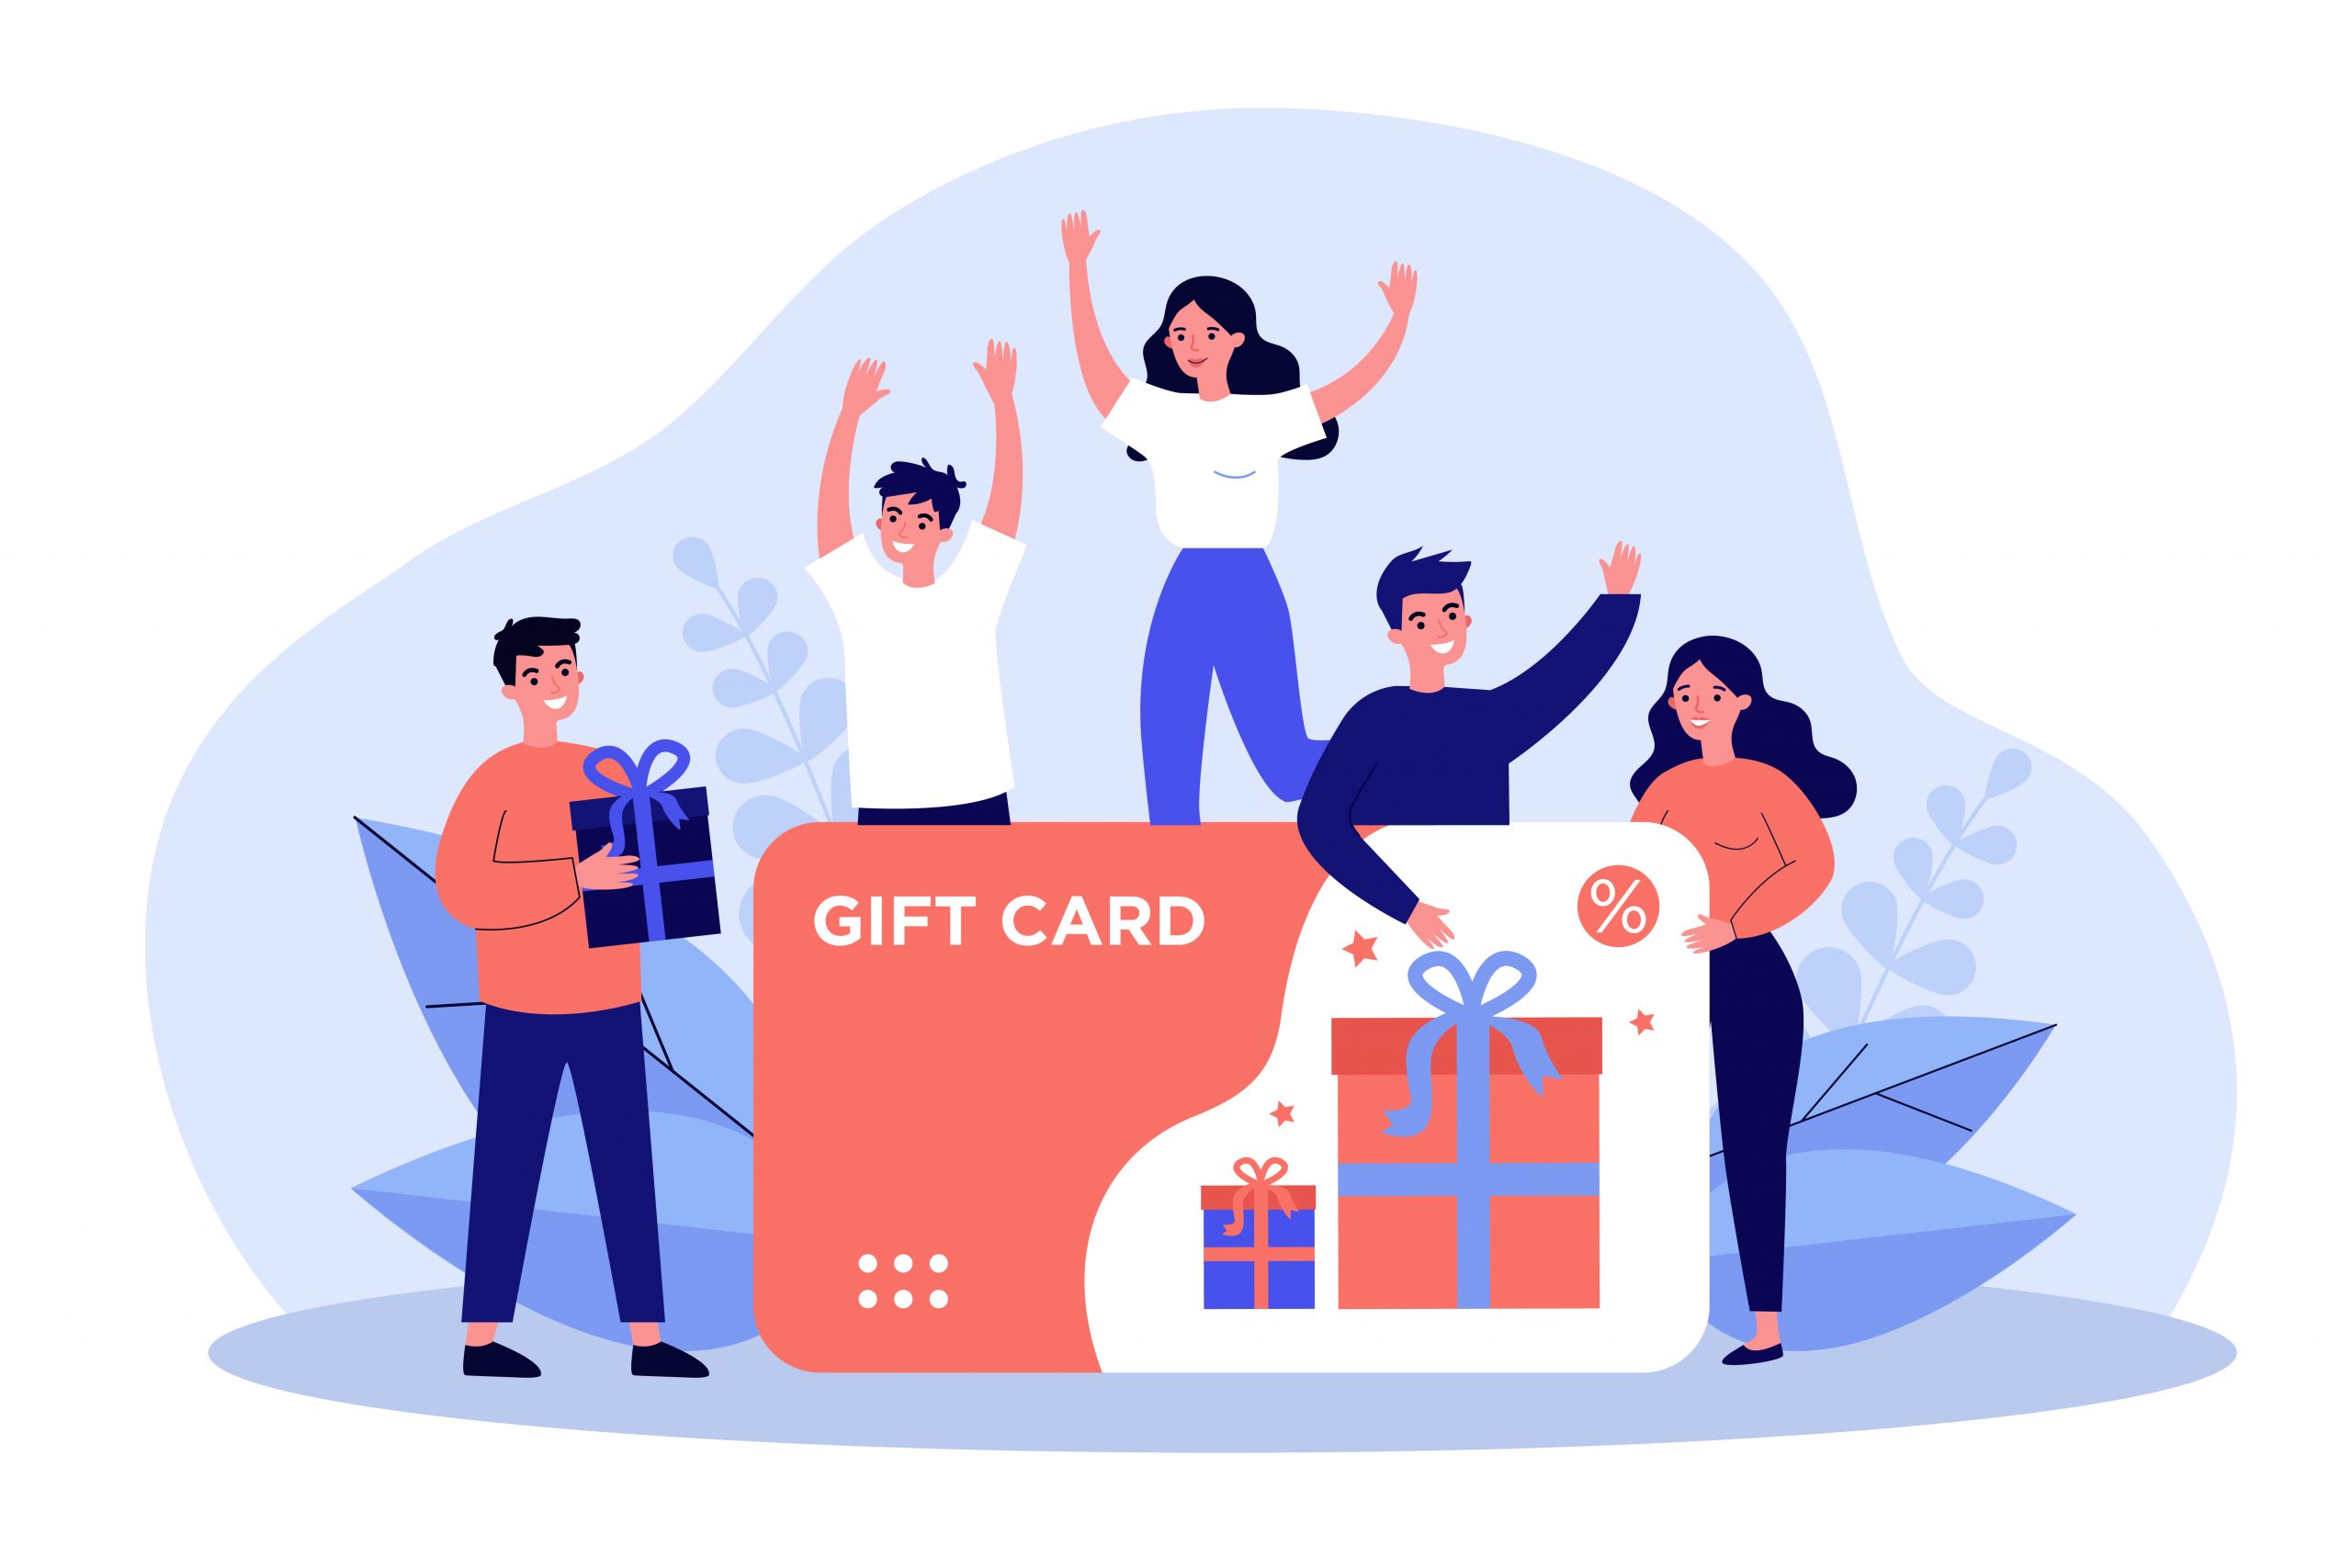 high school graduation gifts -Gift Cards and Cash